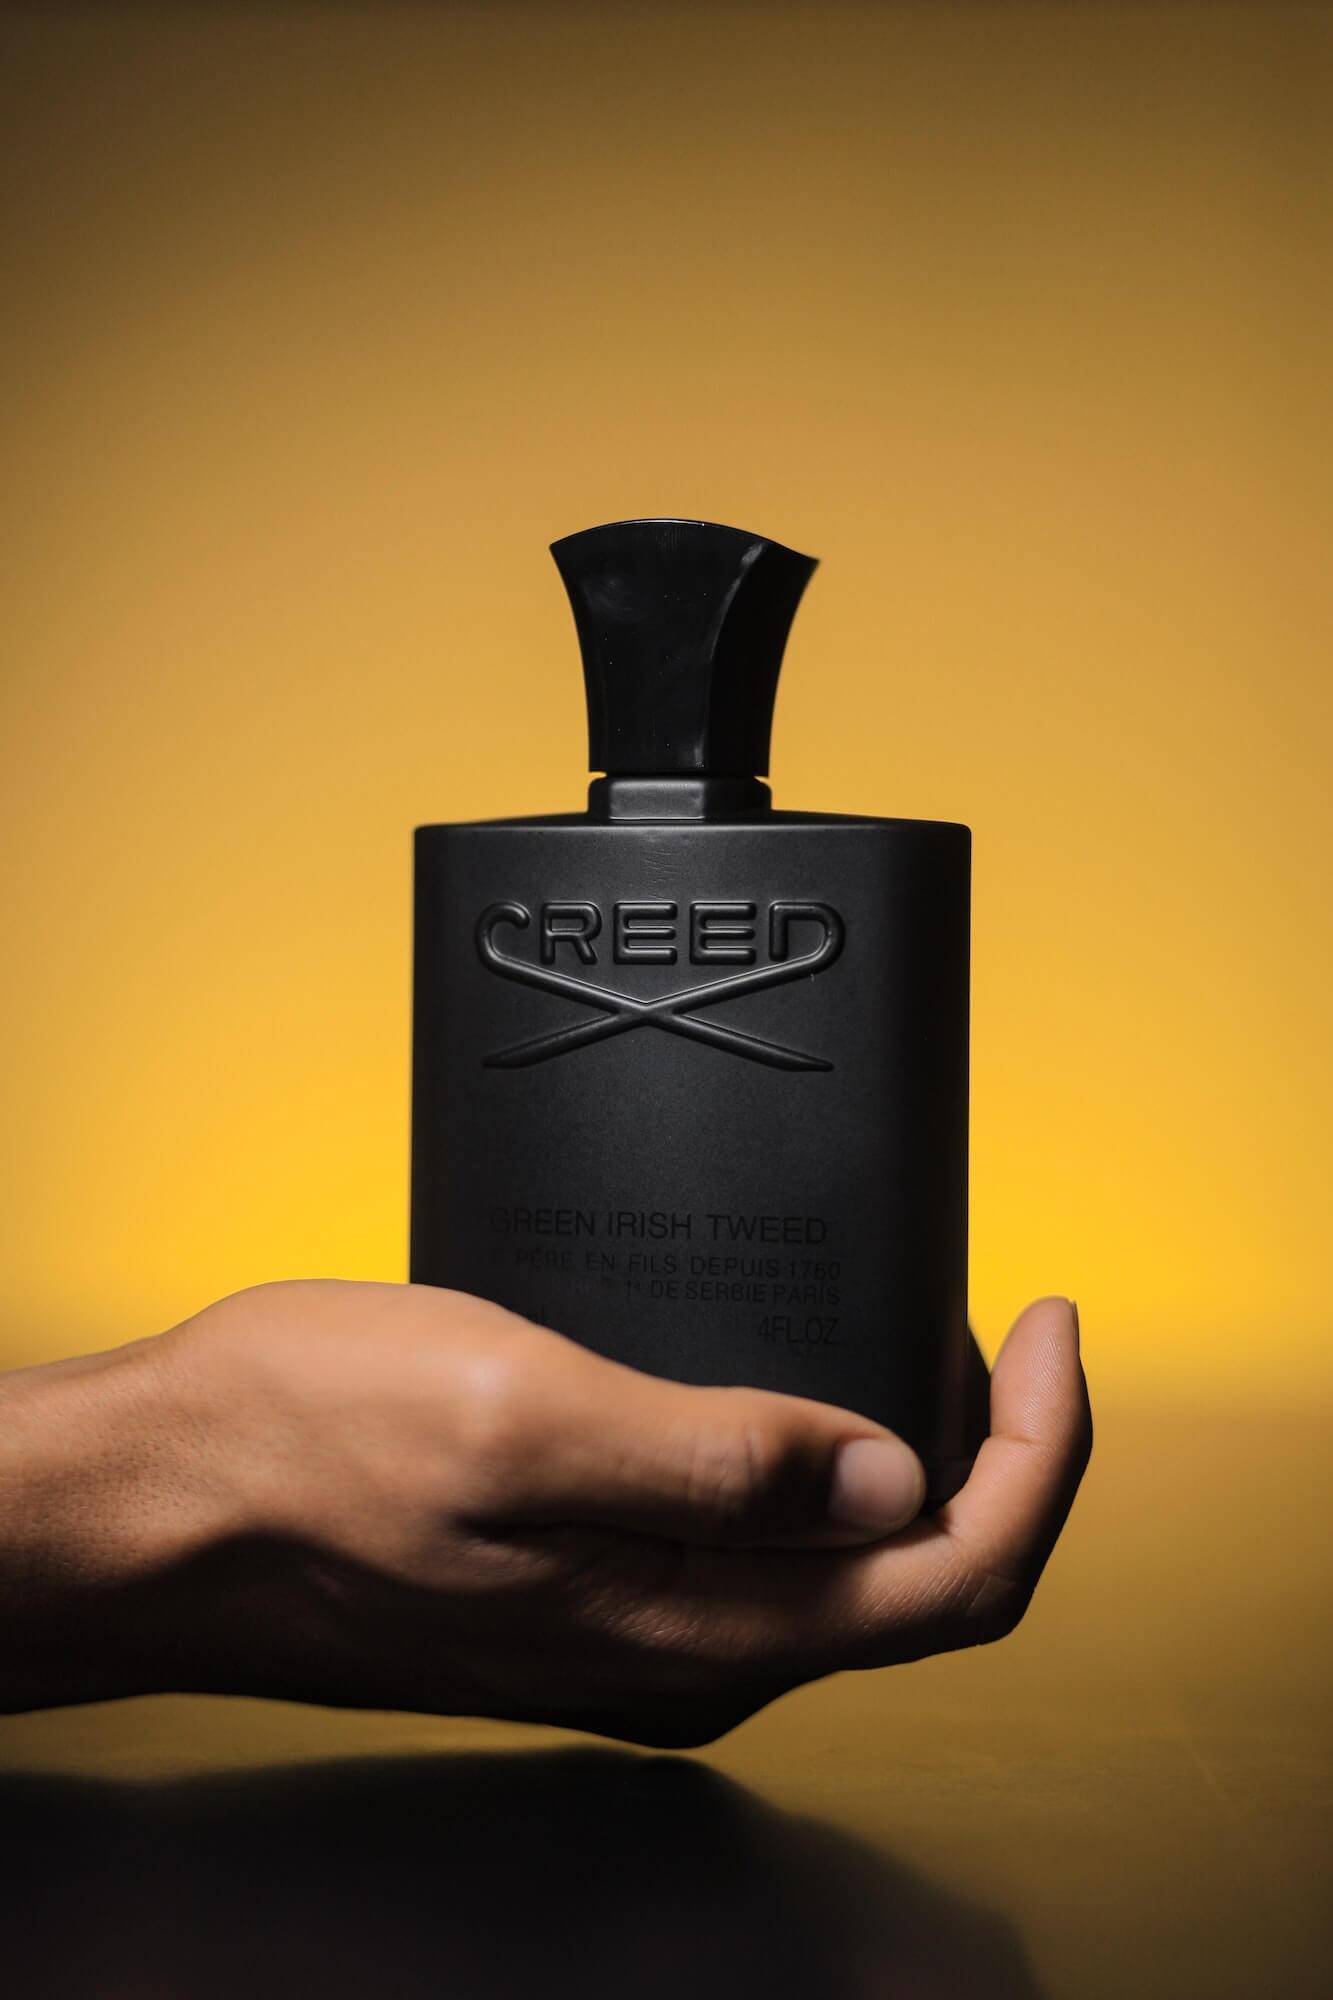 Man's hand holding bottle of Creed Green Irish Tweed cologne with yellow background